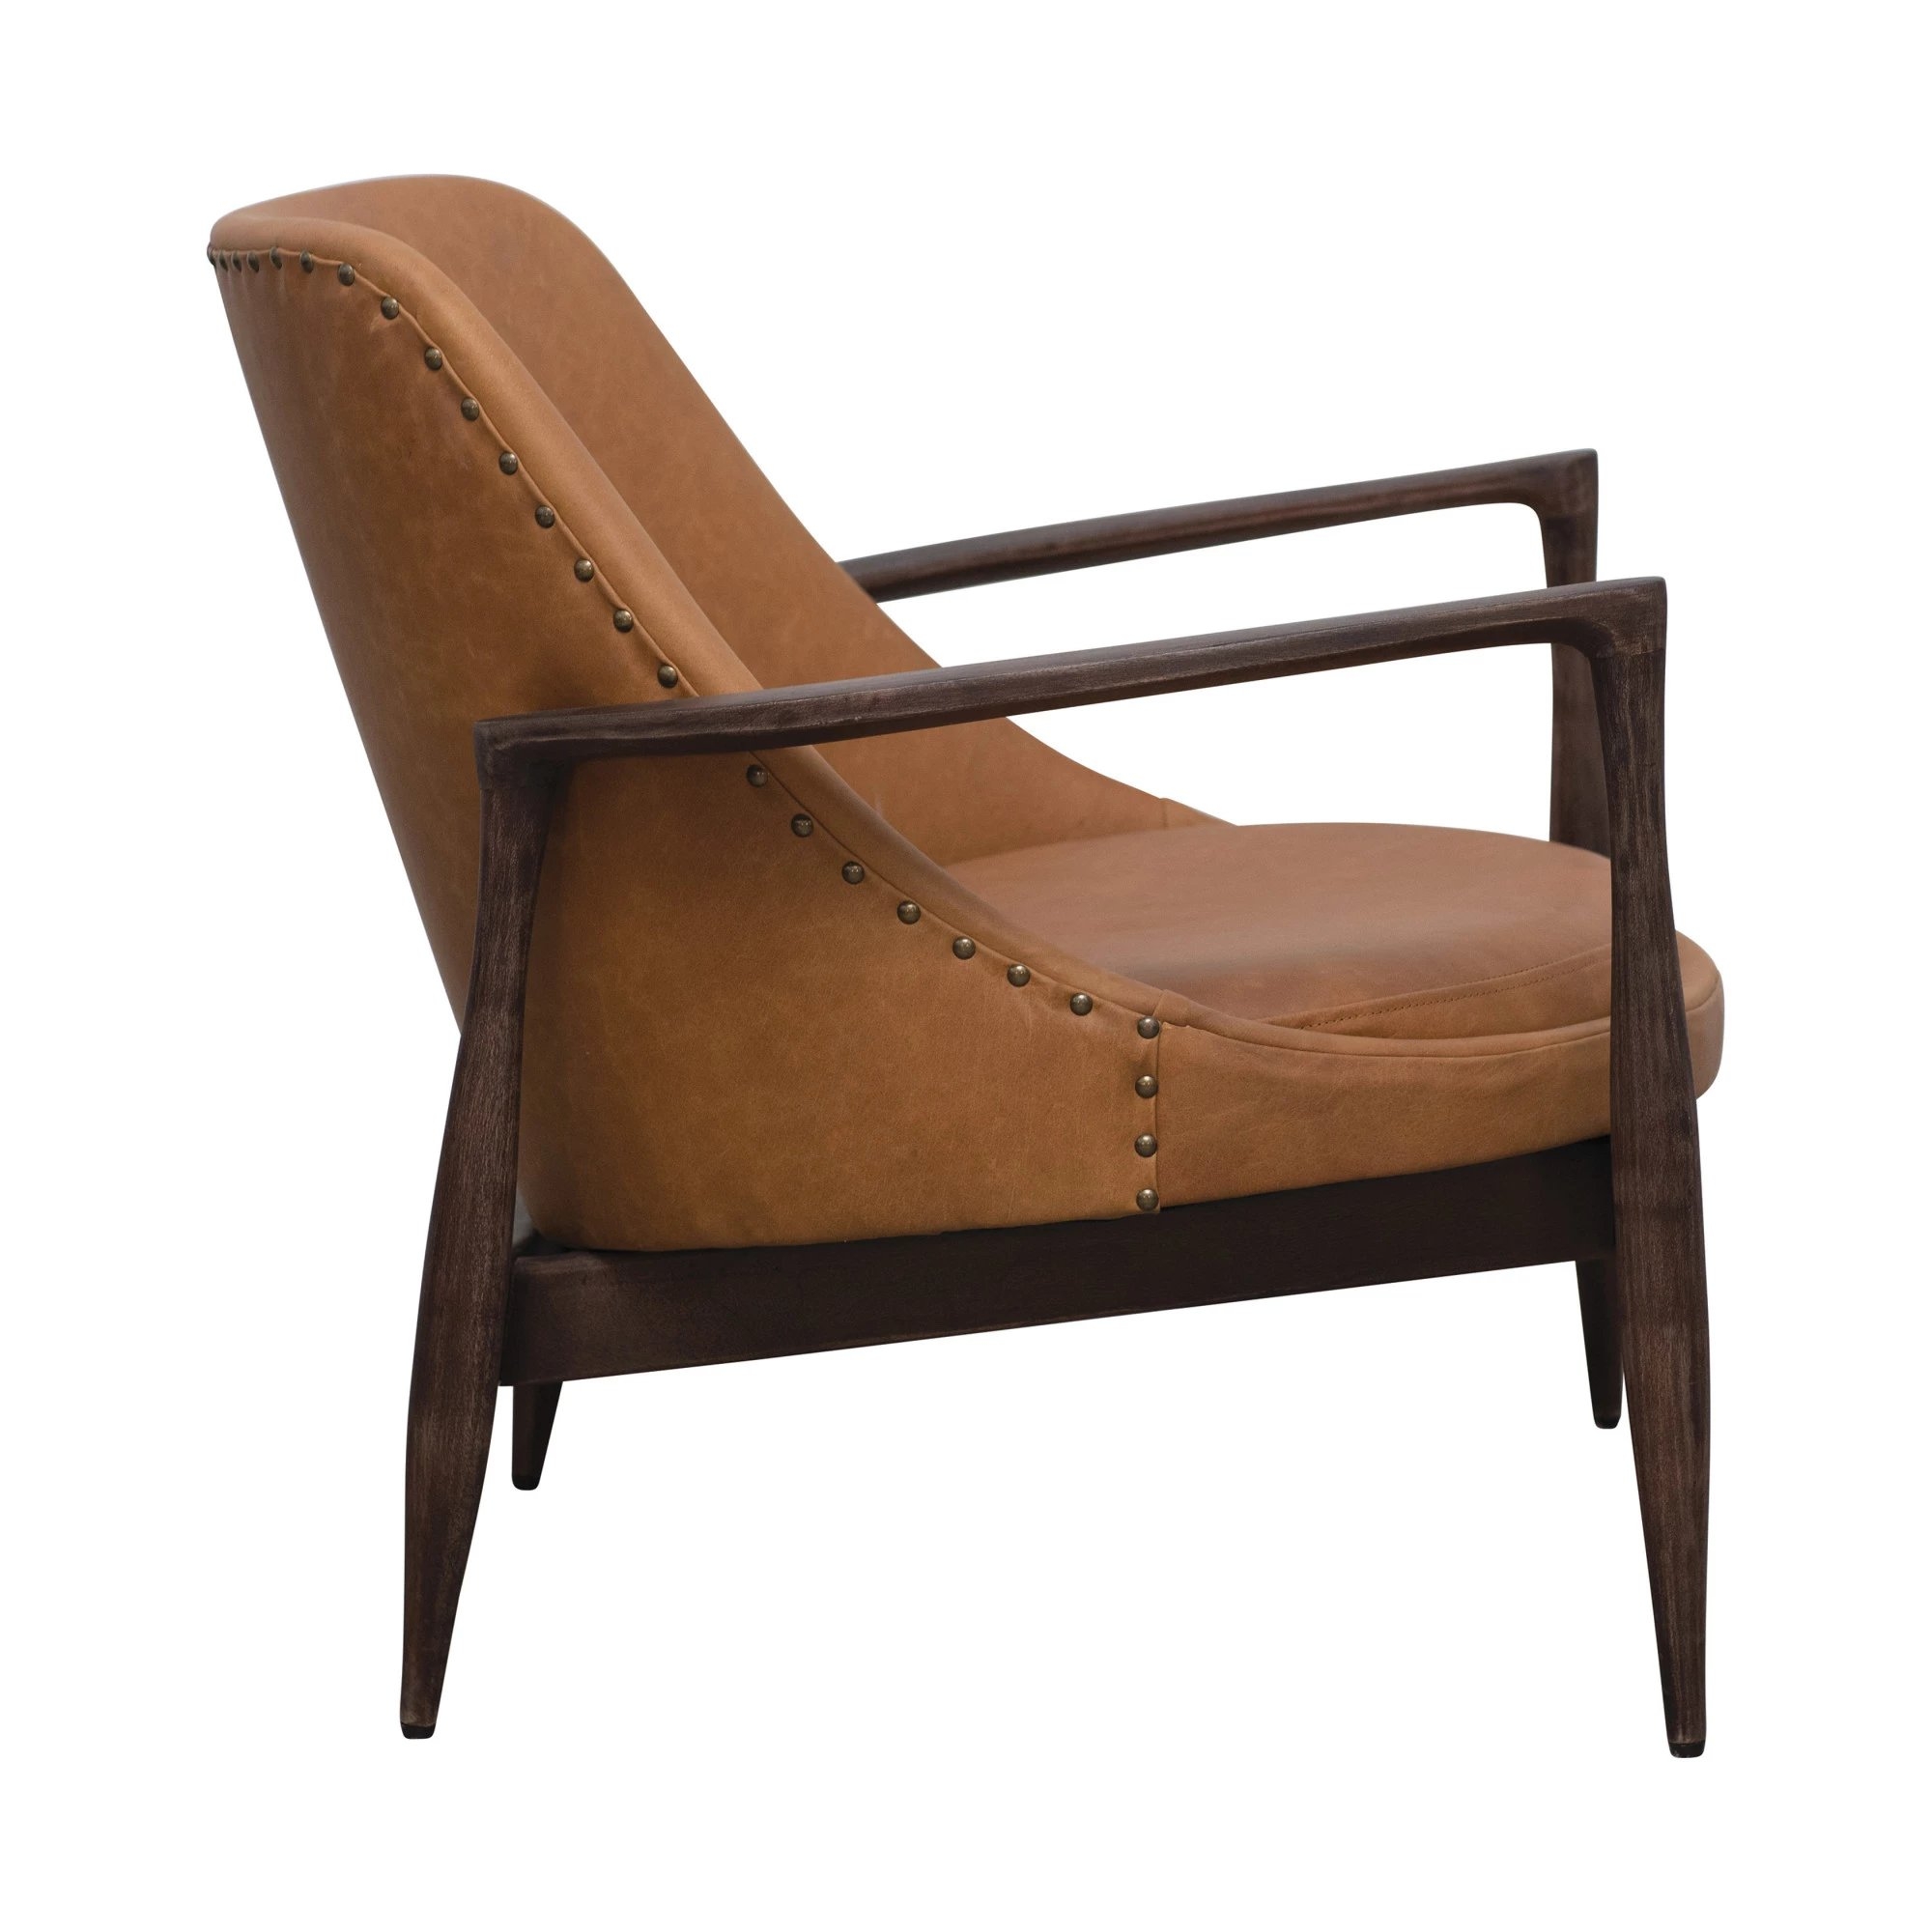 Leather Chair with Mango Wood Frame - Image 2